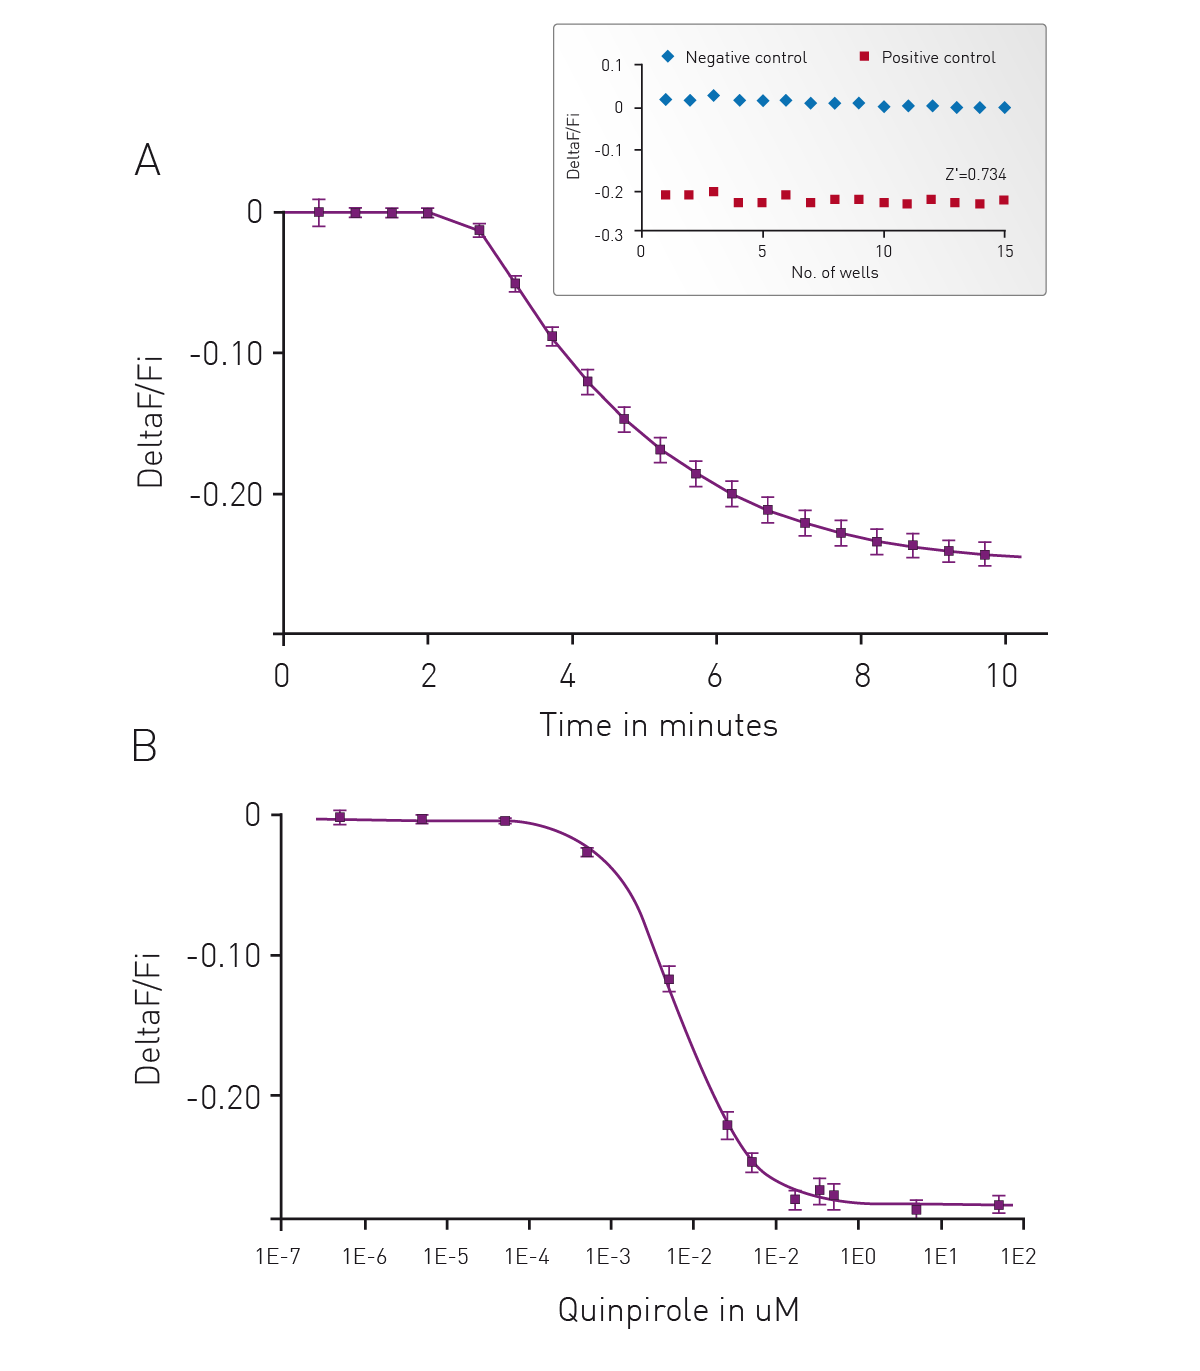 Fig. 4: (A) Kinetic measurements of D2 mediated Gi signaling using green—cADDis sensor and the D2 speciﬁc agonist Quinpirole. Mean +/- SEM; n = 12 wells. Insert, Gi assay performance in 96-well plate. Z’ factor is 0.741. (B) Dose response to Quinpirole. EC50 is 5.7 nM. Mean +/- SEM. n = 6 wells / condition.